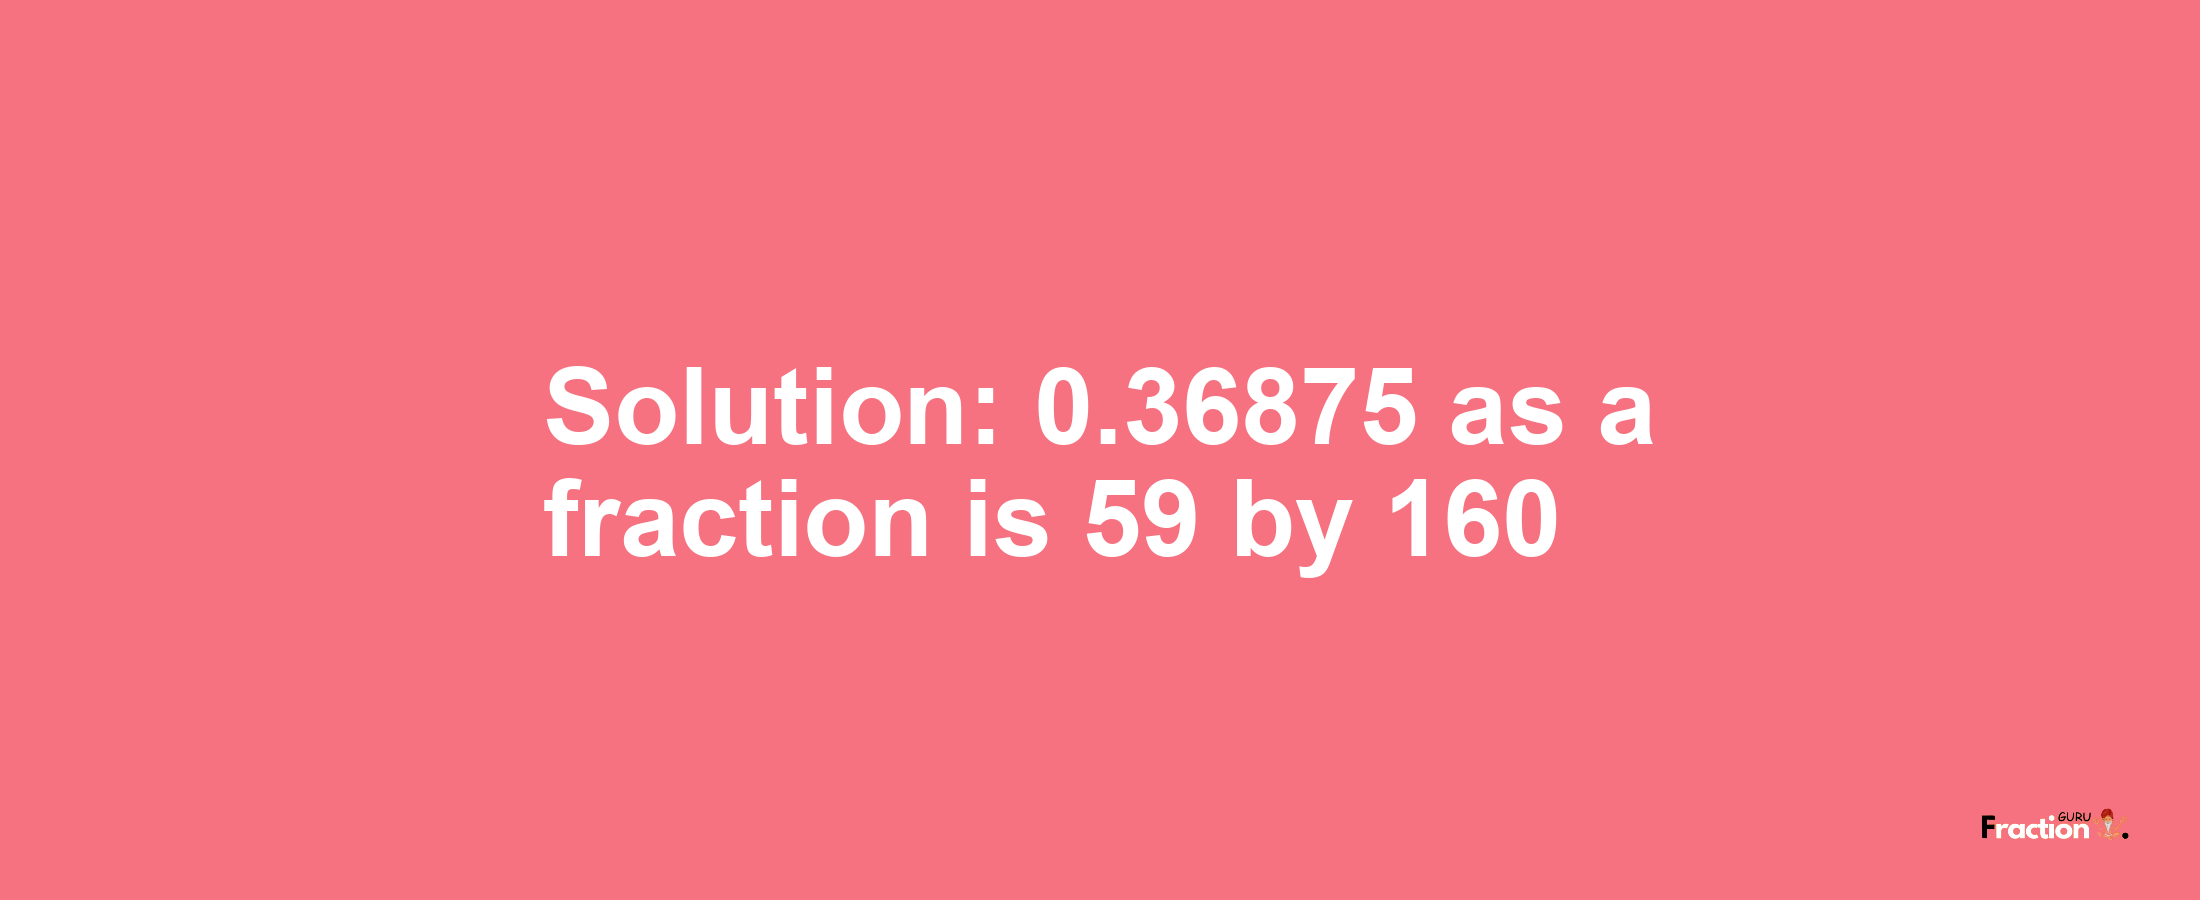 Solution:0.36875 as a fraction is 59/160